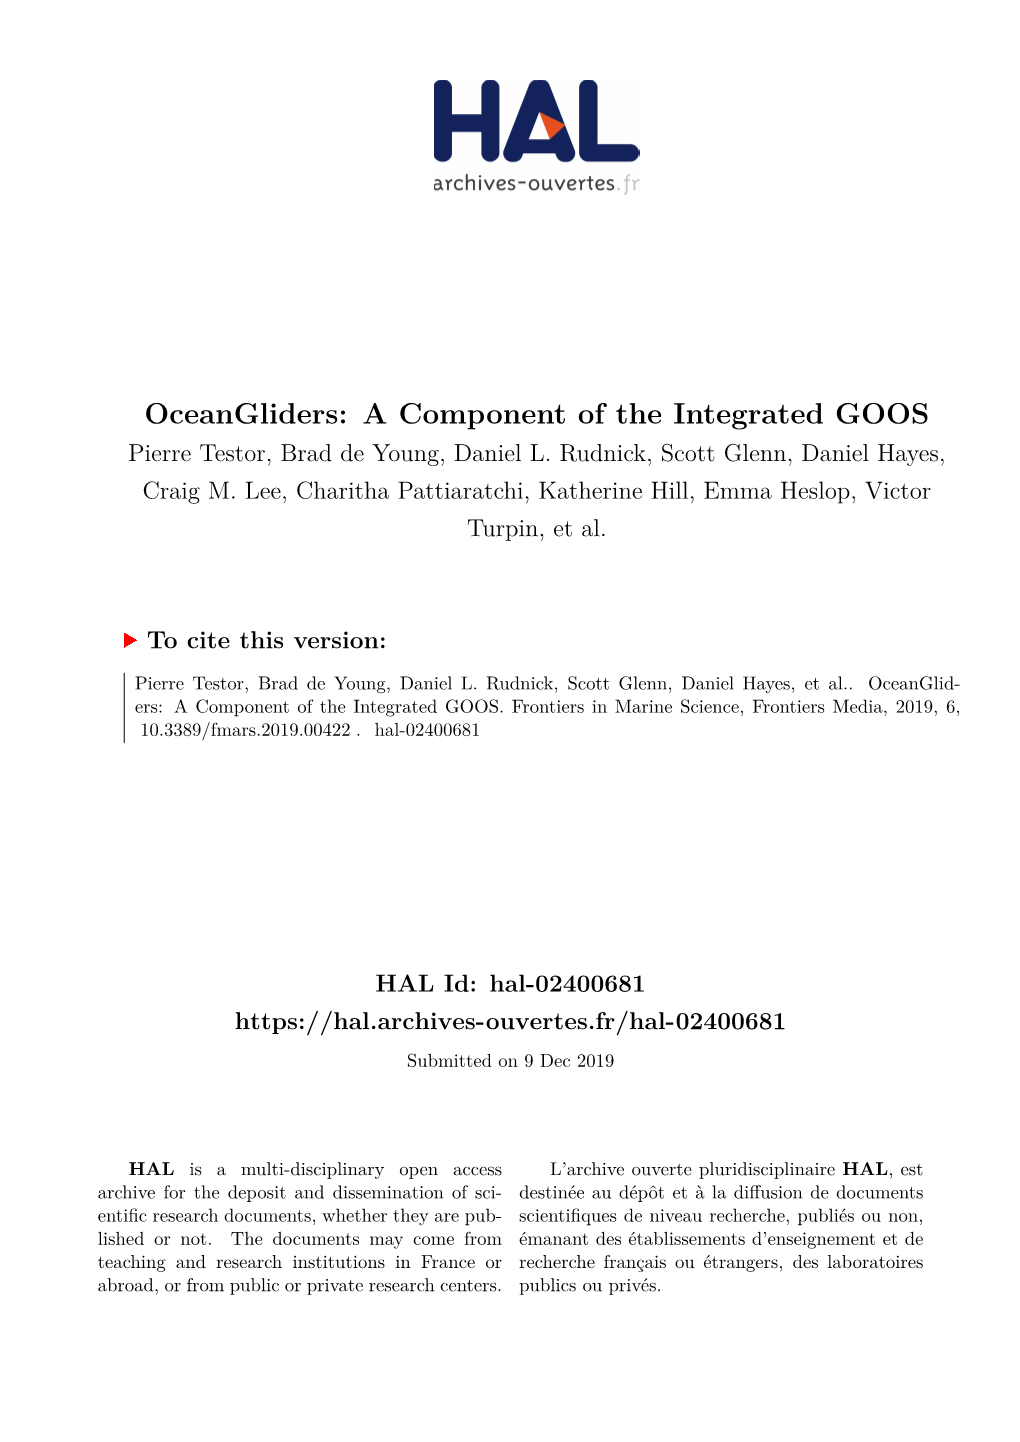 Oceangliders: a Component of the Integrated GOOS Pierre Testor, Brad De Young, Daniel L